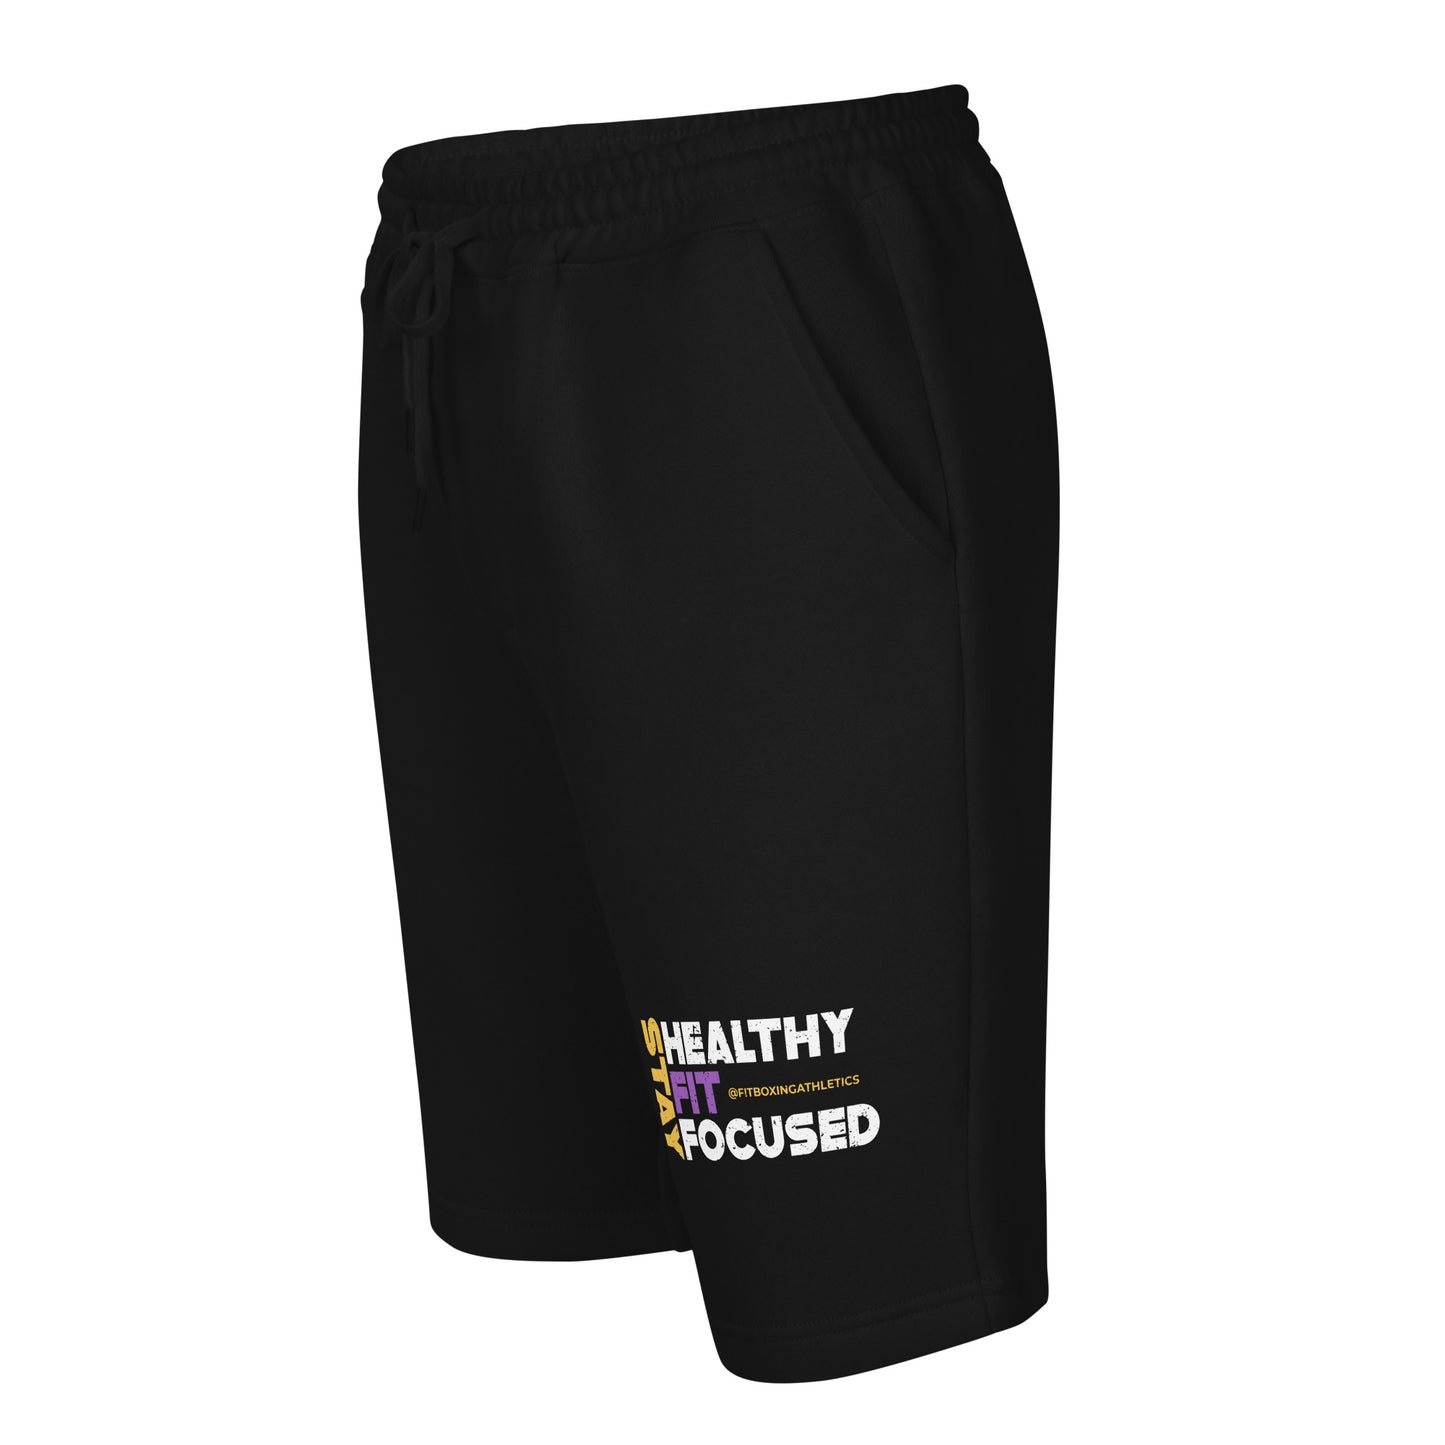 Stay Healthy Fit Focused Men shorts (White Logo)